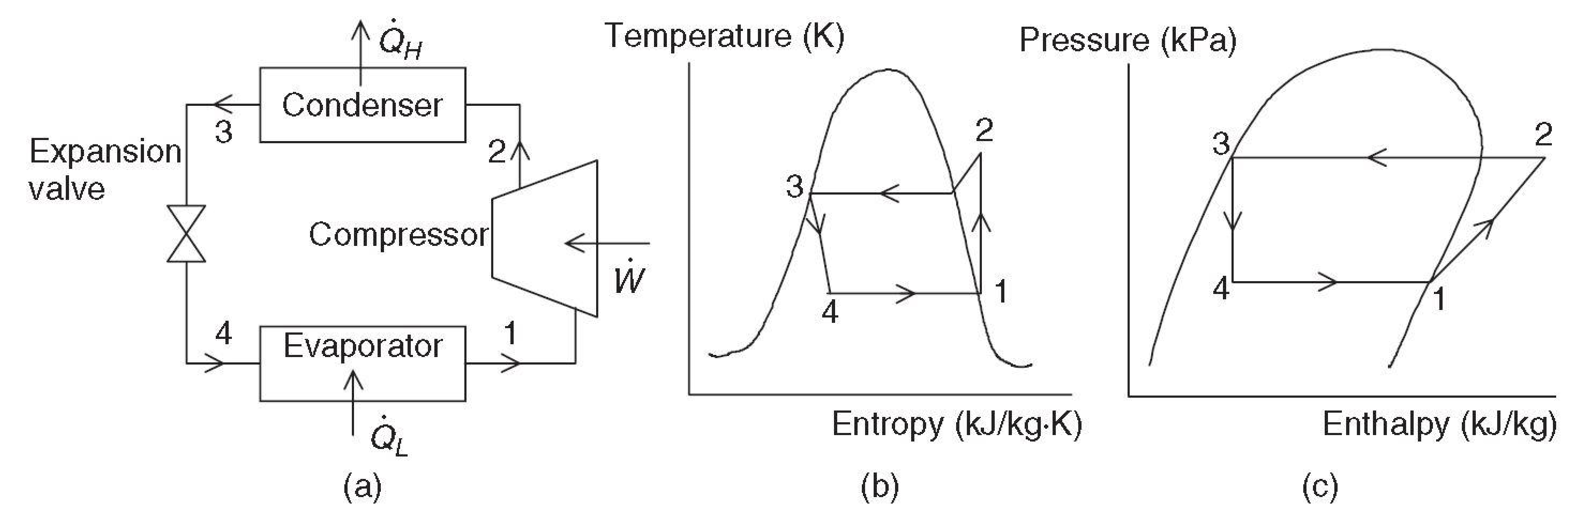 Figure 1: (a) A basic vapor-compression refrigeration system, (b) its T-s diagram, and (c) its log P-h